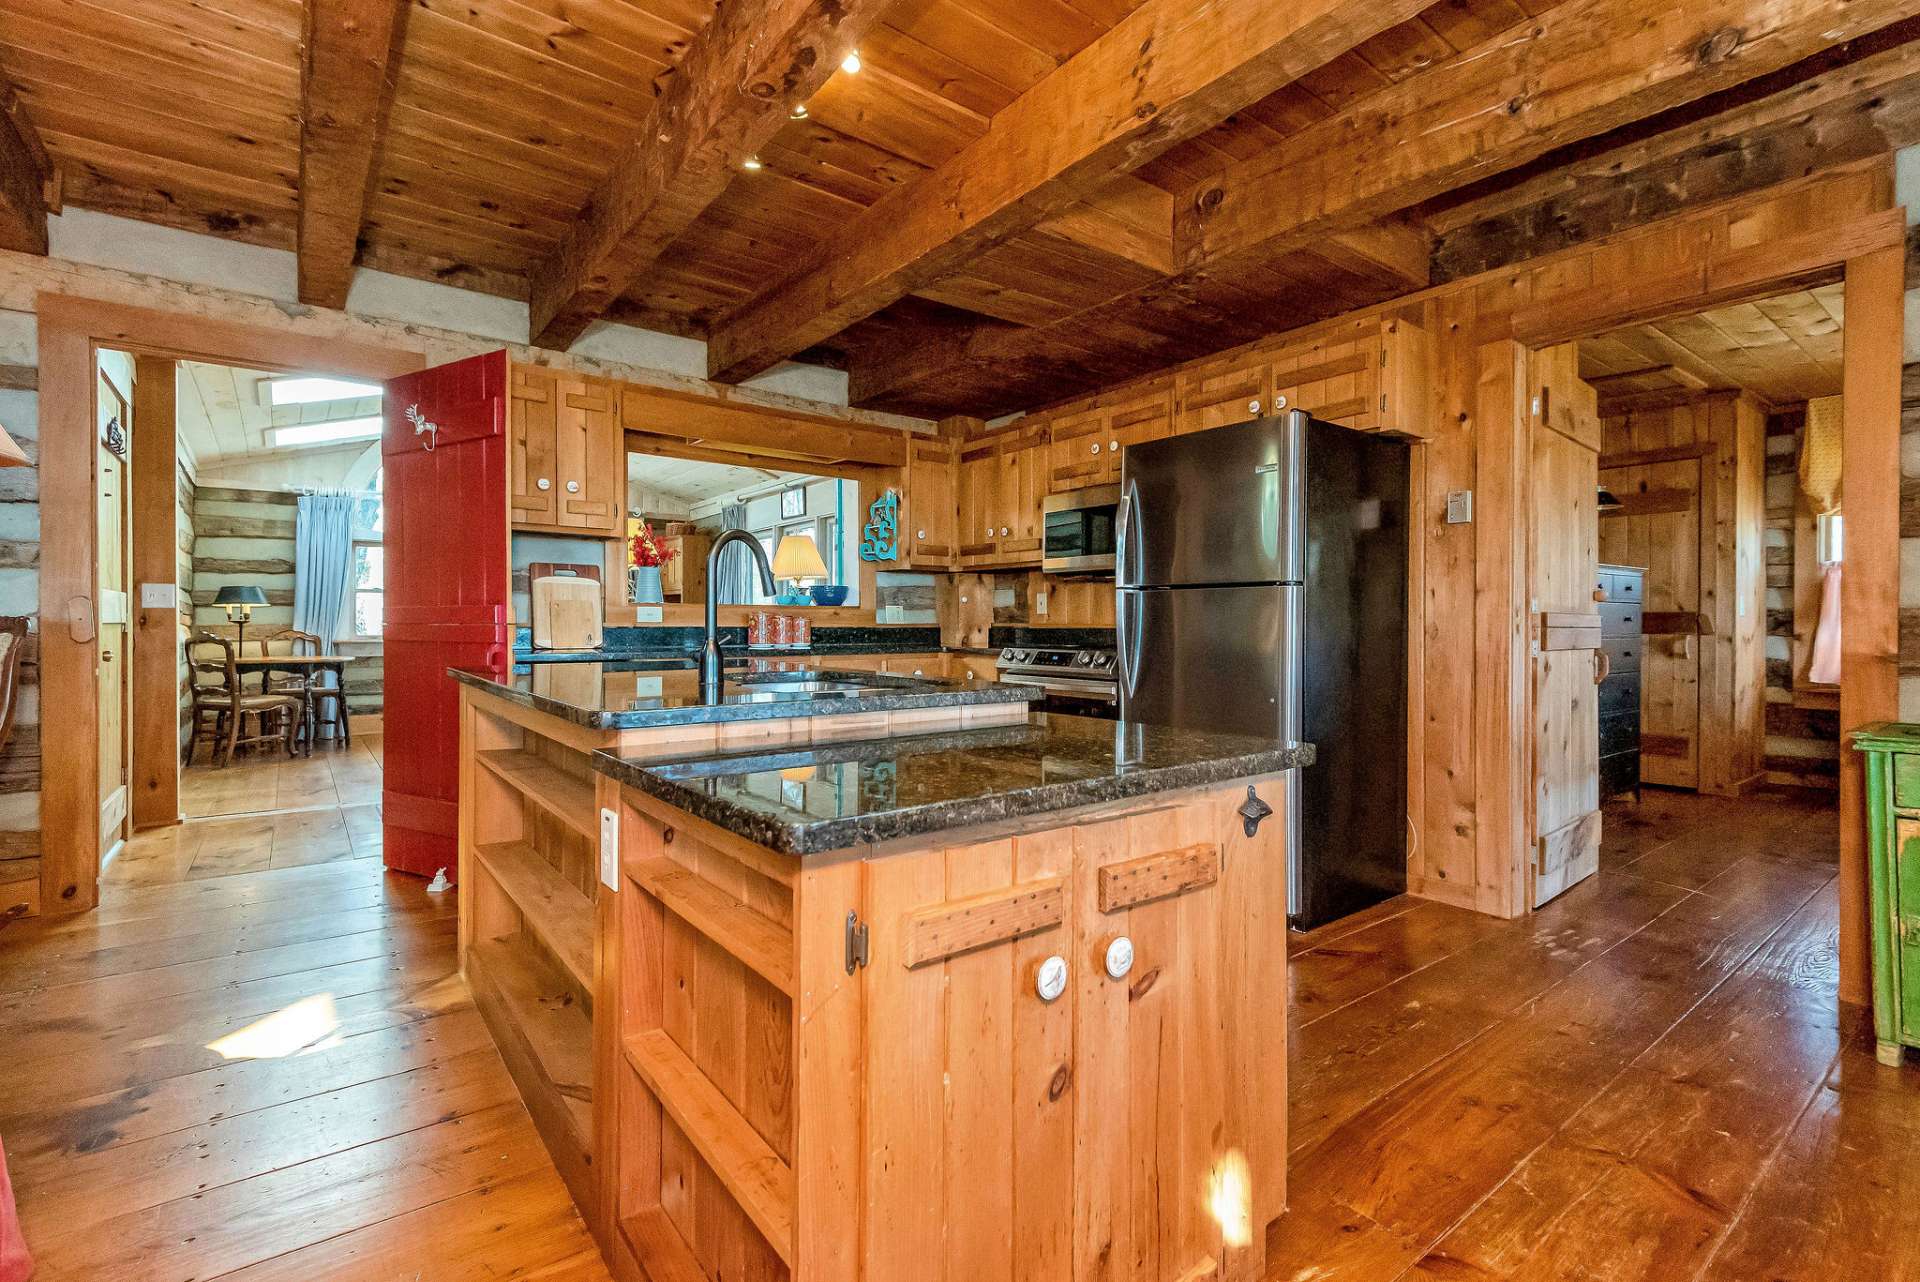 The sturdy hand-hewn beams and wide plank flooring amplify the rustic mountain charm.